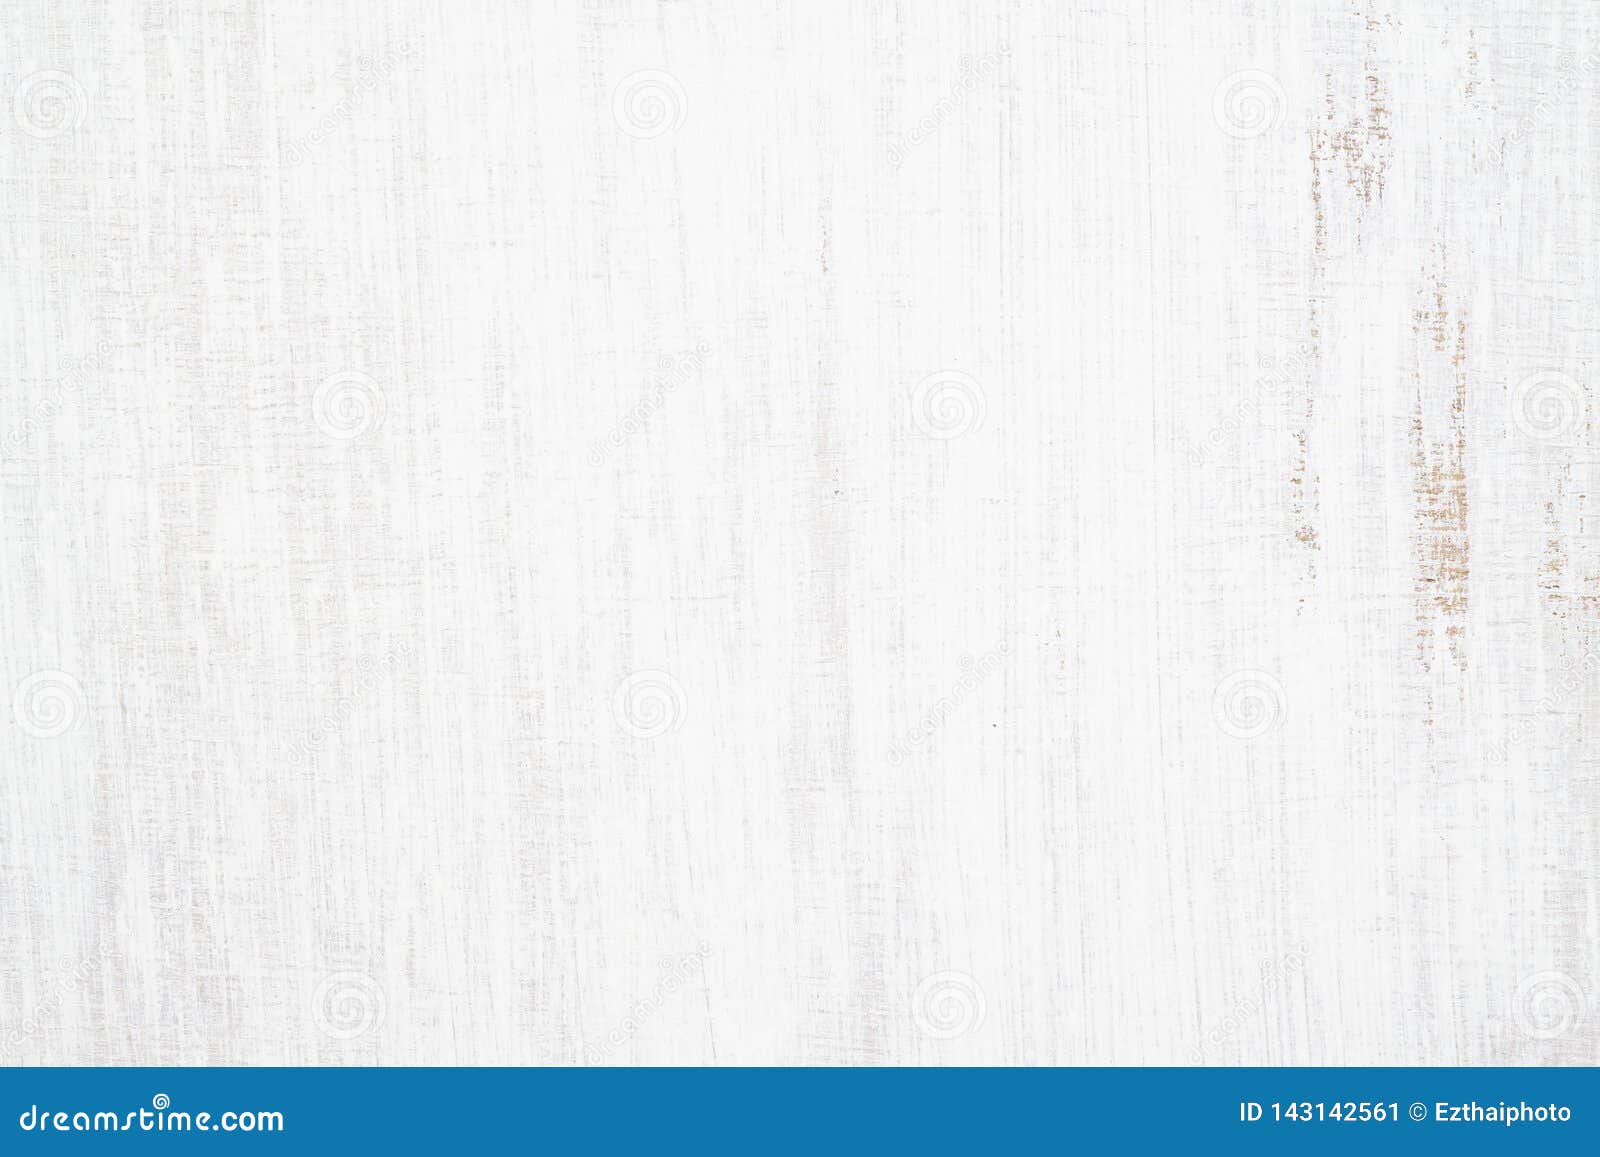 Worn White Paint On Wood Background Texture Stock Photo, Picture and  Royalty Free Image. Image 6722925.